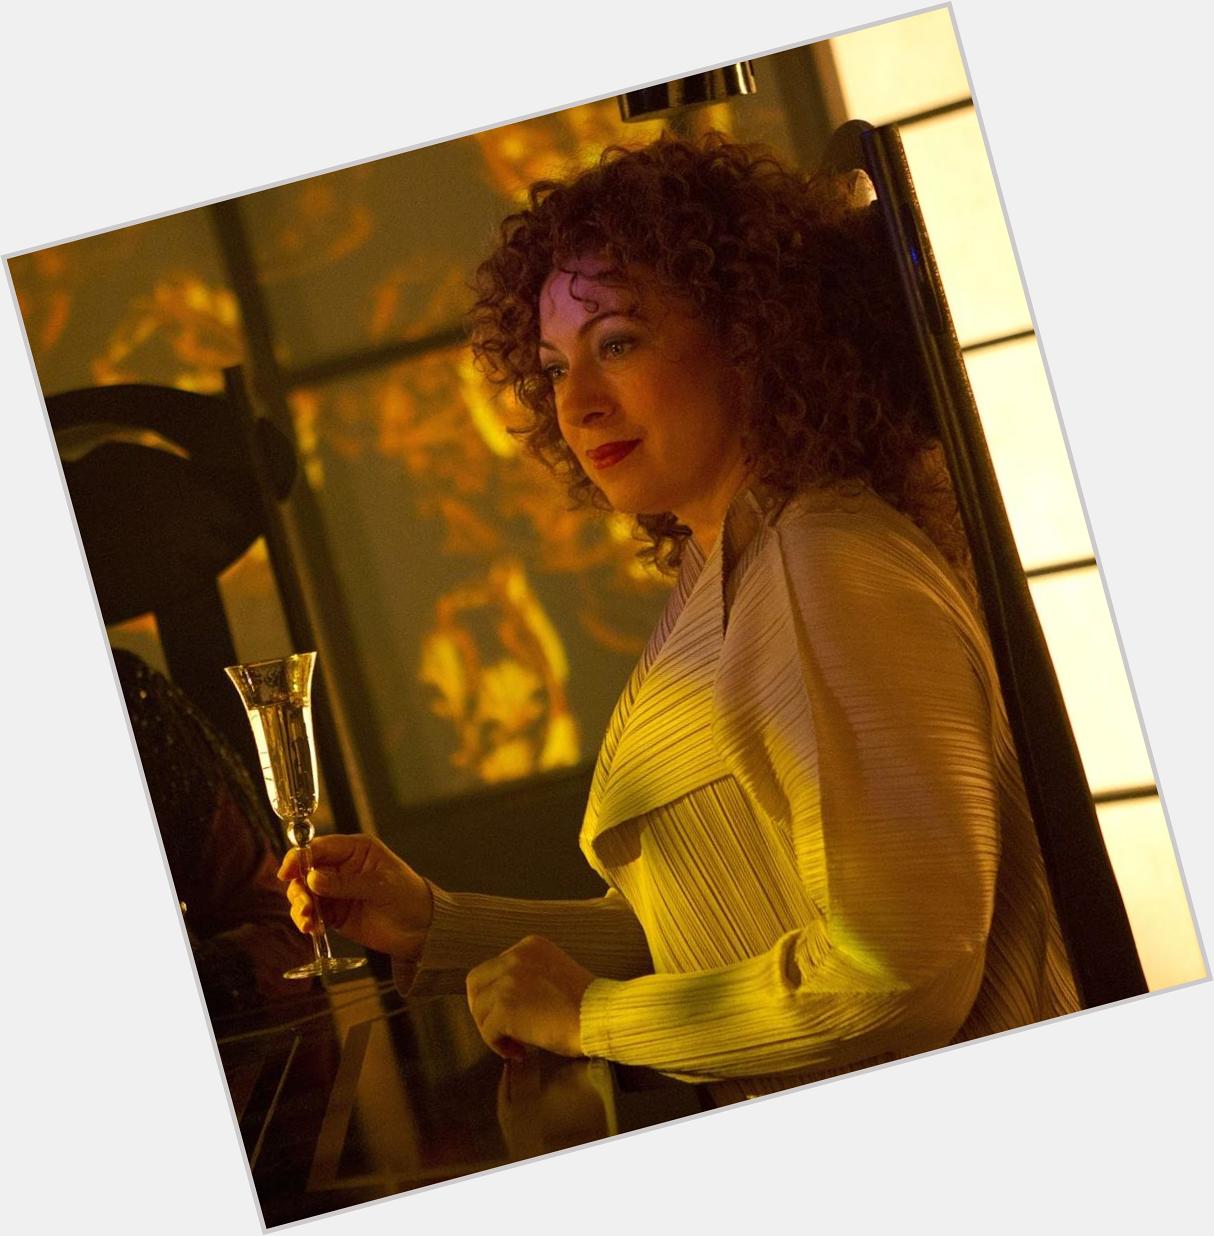 \" Happy Birthday, sweetie! Best wishes to Alex Kingston on her special day! SPOILERS... ^-^